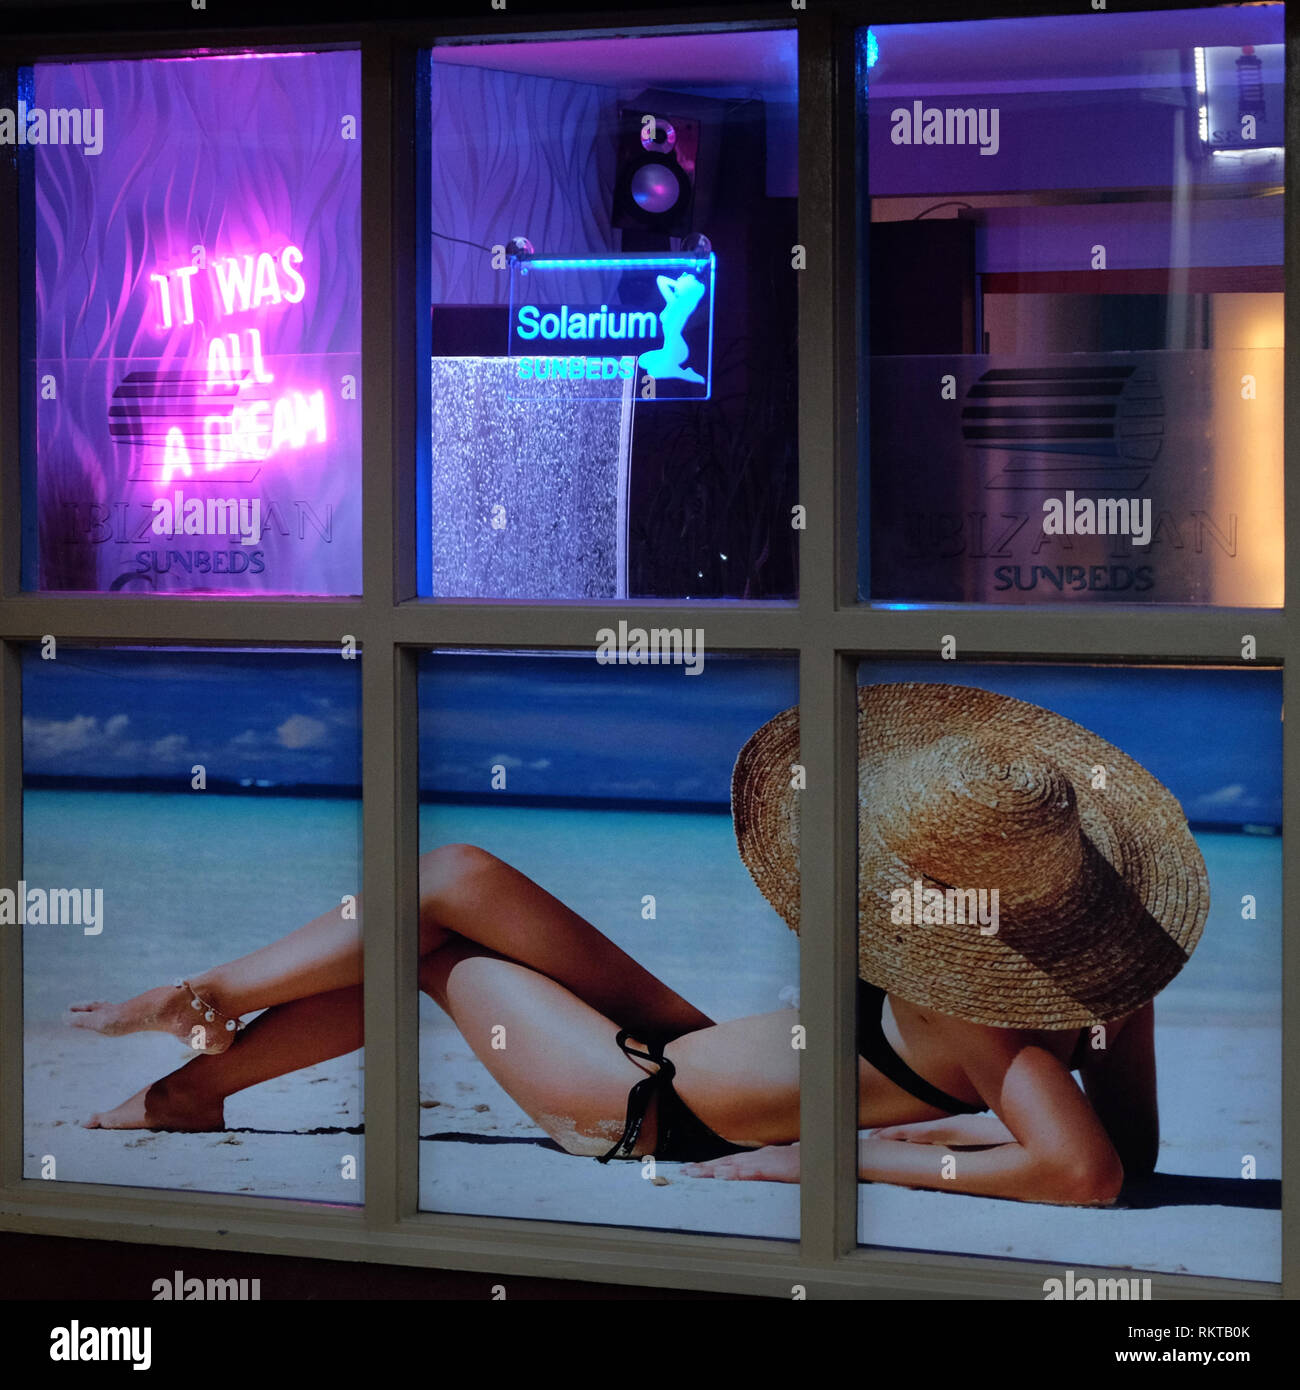 'It was all a dream' Tanning shop in Carrickfergus, Northern Ireland. Stock Photo